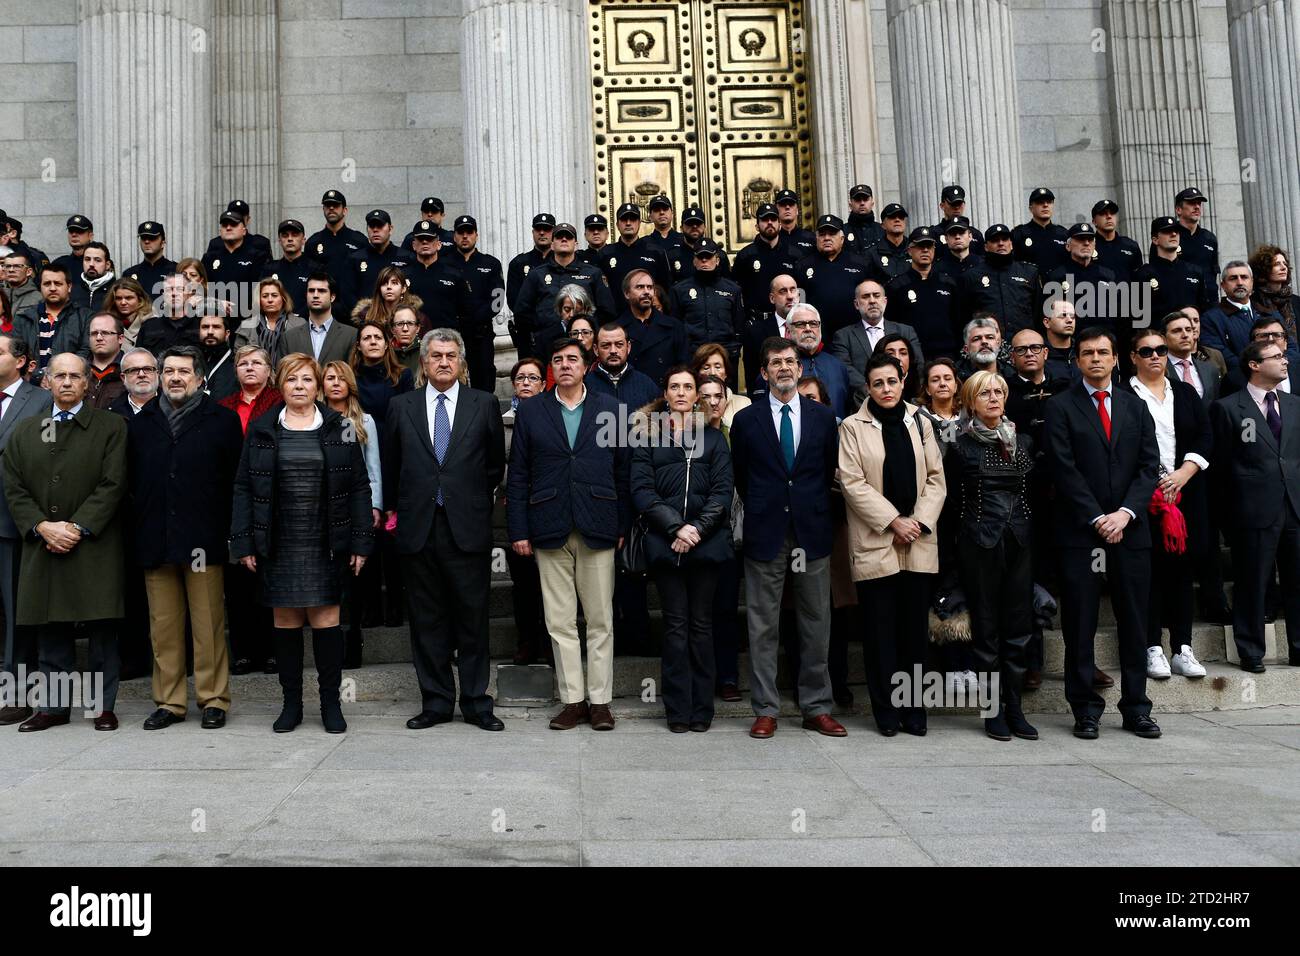 Madrid, 12/14/2015. Minute of silence in the Congress of Deputies for the death of two police officers in the Kabul attack. Photo: Oscar del Pozo ARCHDC. Credit: Album / Archivo ABC / Oscar del Pozo Stock Photo